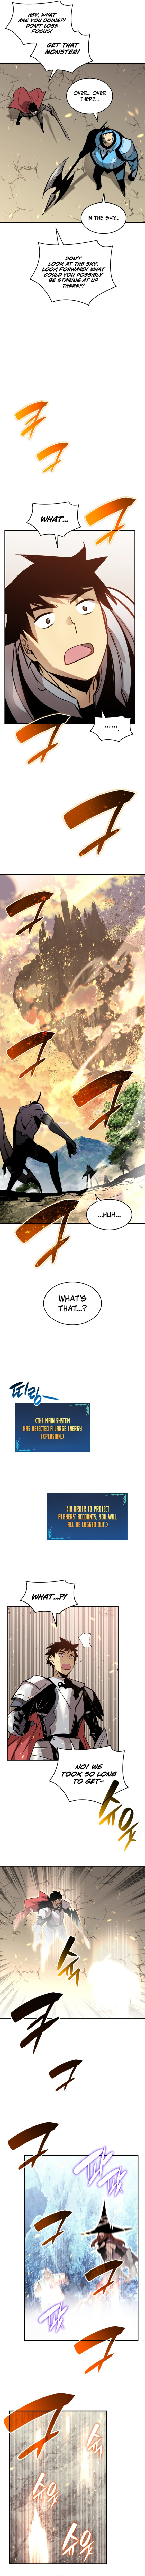 Worn and Torn Newbie - Chapter 123 Page 7